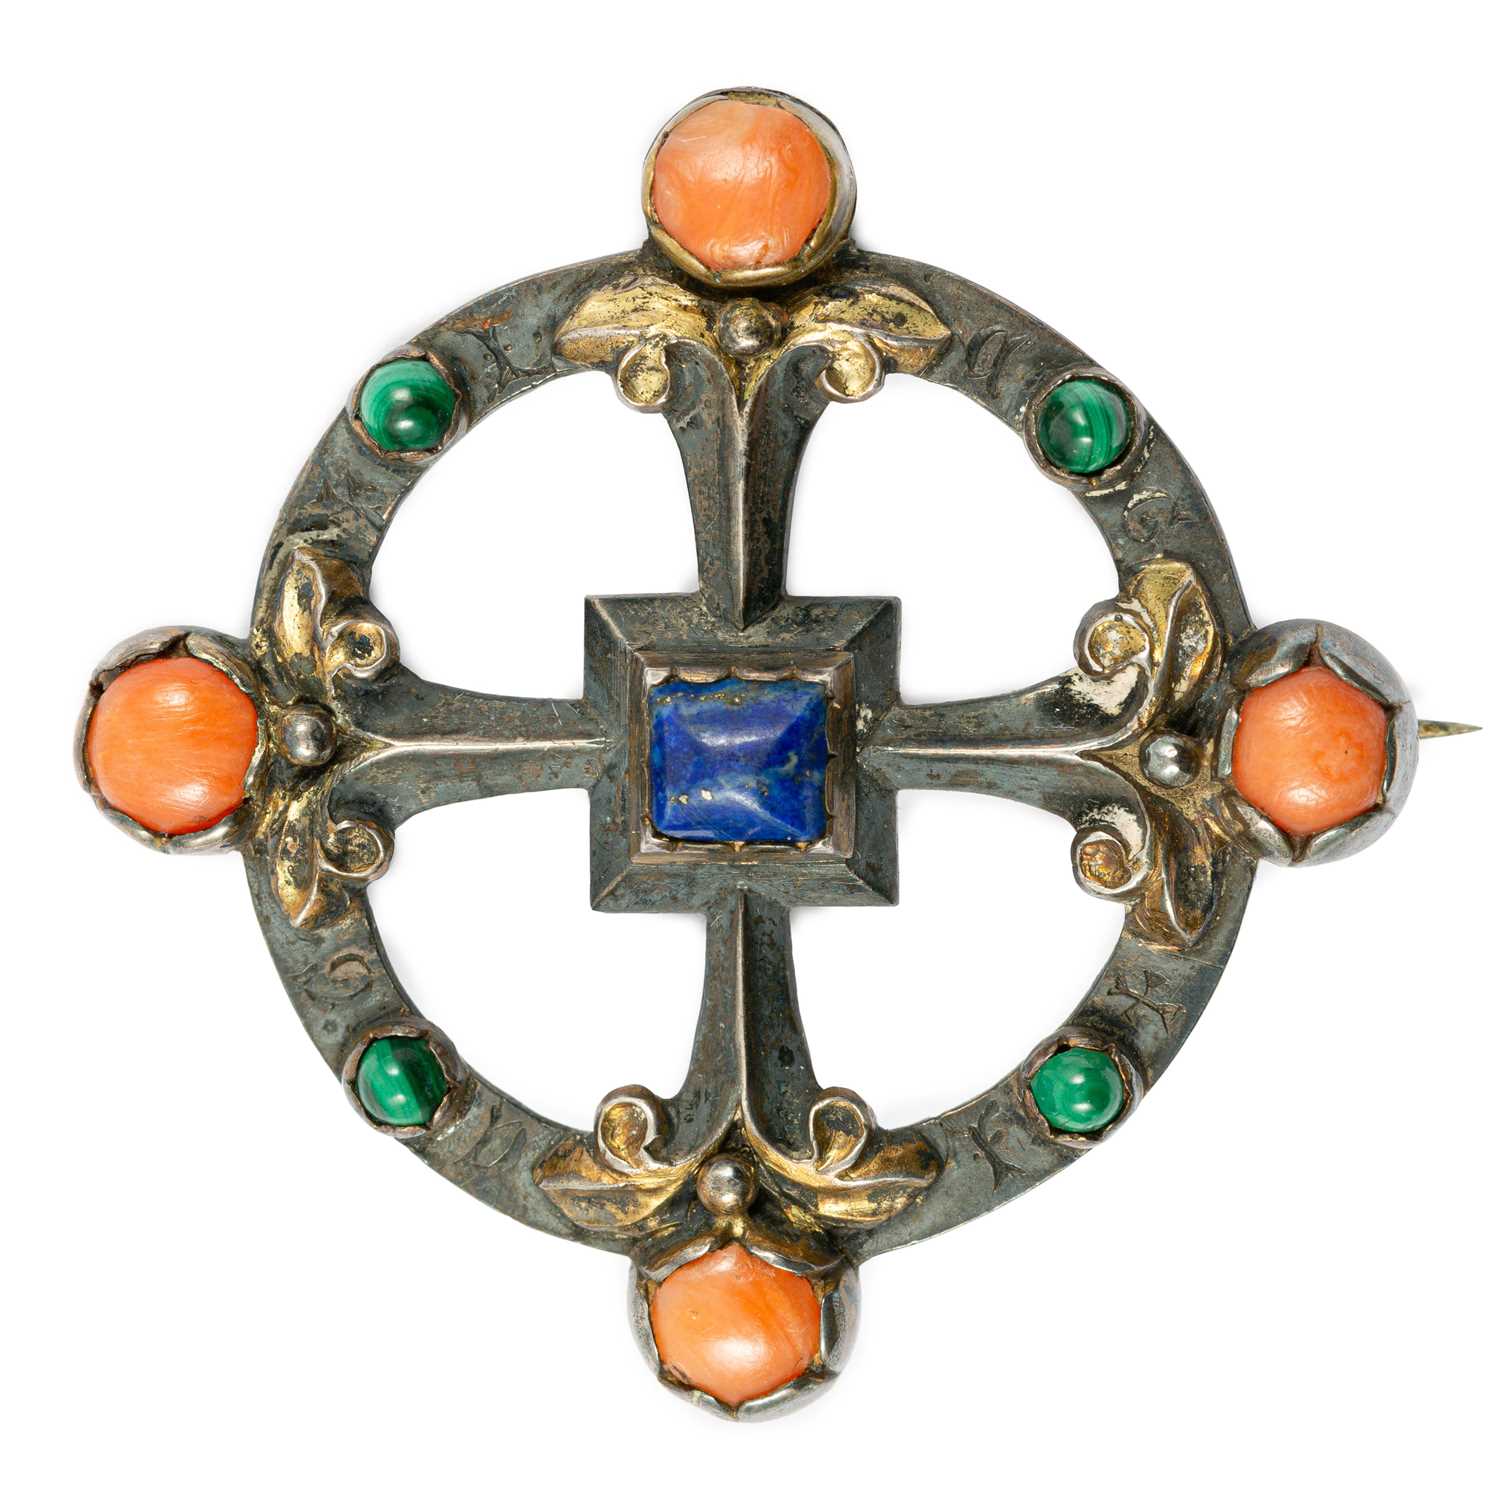 Lot 184 - A Victorian Gothic Revival brooch designed by William Burges.